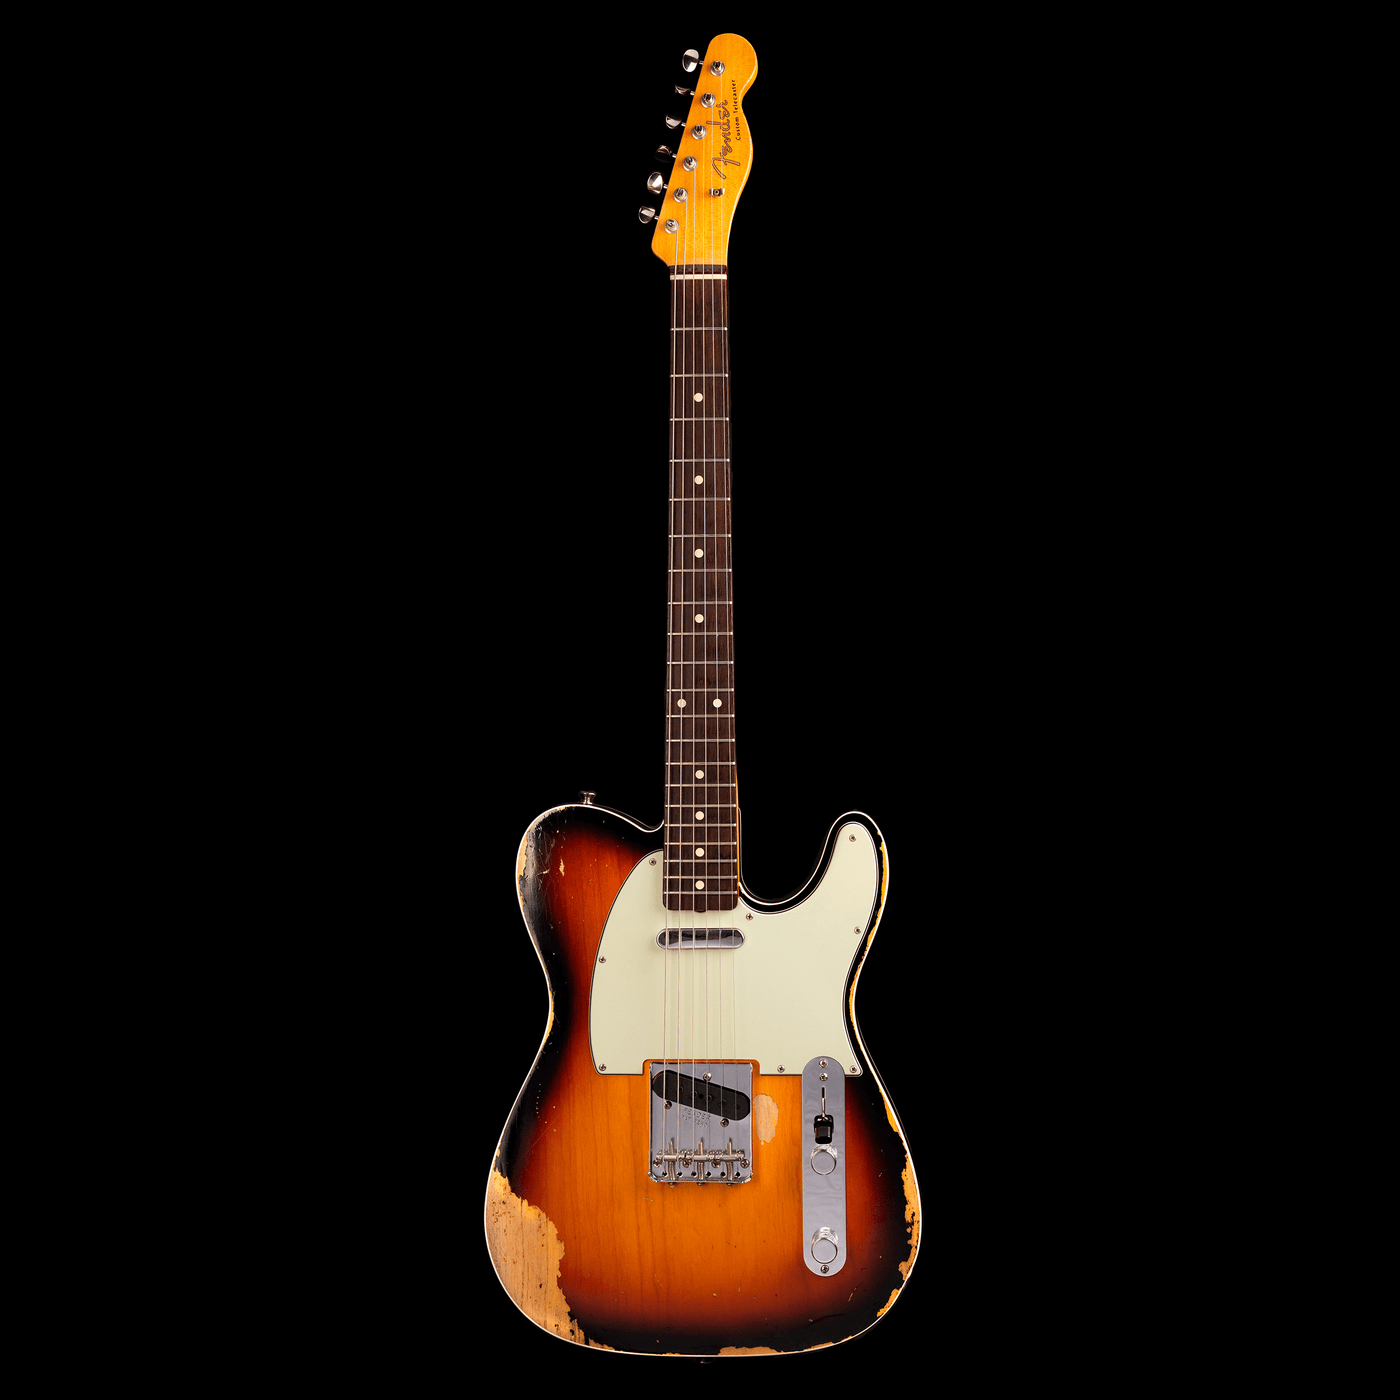 Fender Custom Shop Telecaster Sunburst Heavy Relic 2017 - $4999990 - Gearhub - Fender Custom Shop 1952 Telecaster Heavy Relic Tobacco SunburstThe dedicated craftspeople at the Fender Custom Shop have been recreating some of the legendary company's most iconic instruments for over 30 years. One of the most beloved, and recognizeable of those guitars, is the 1952 Telecaster. Although this particular model had been available in music stores since 1950, under the name Broadcaster, then without a name at all, it